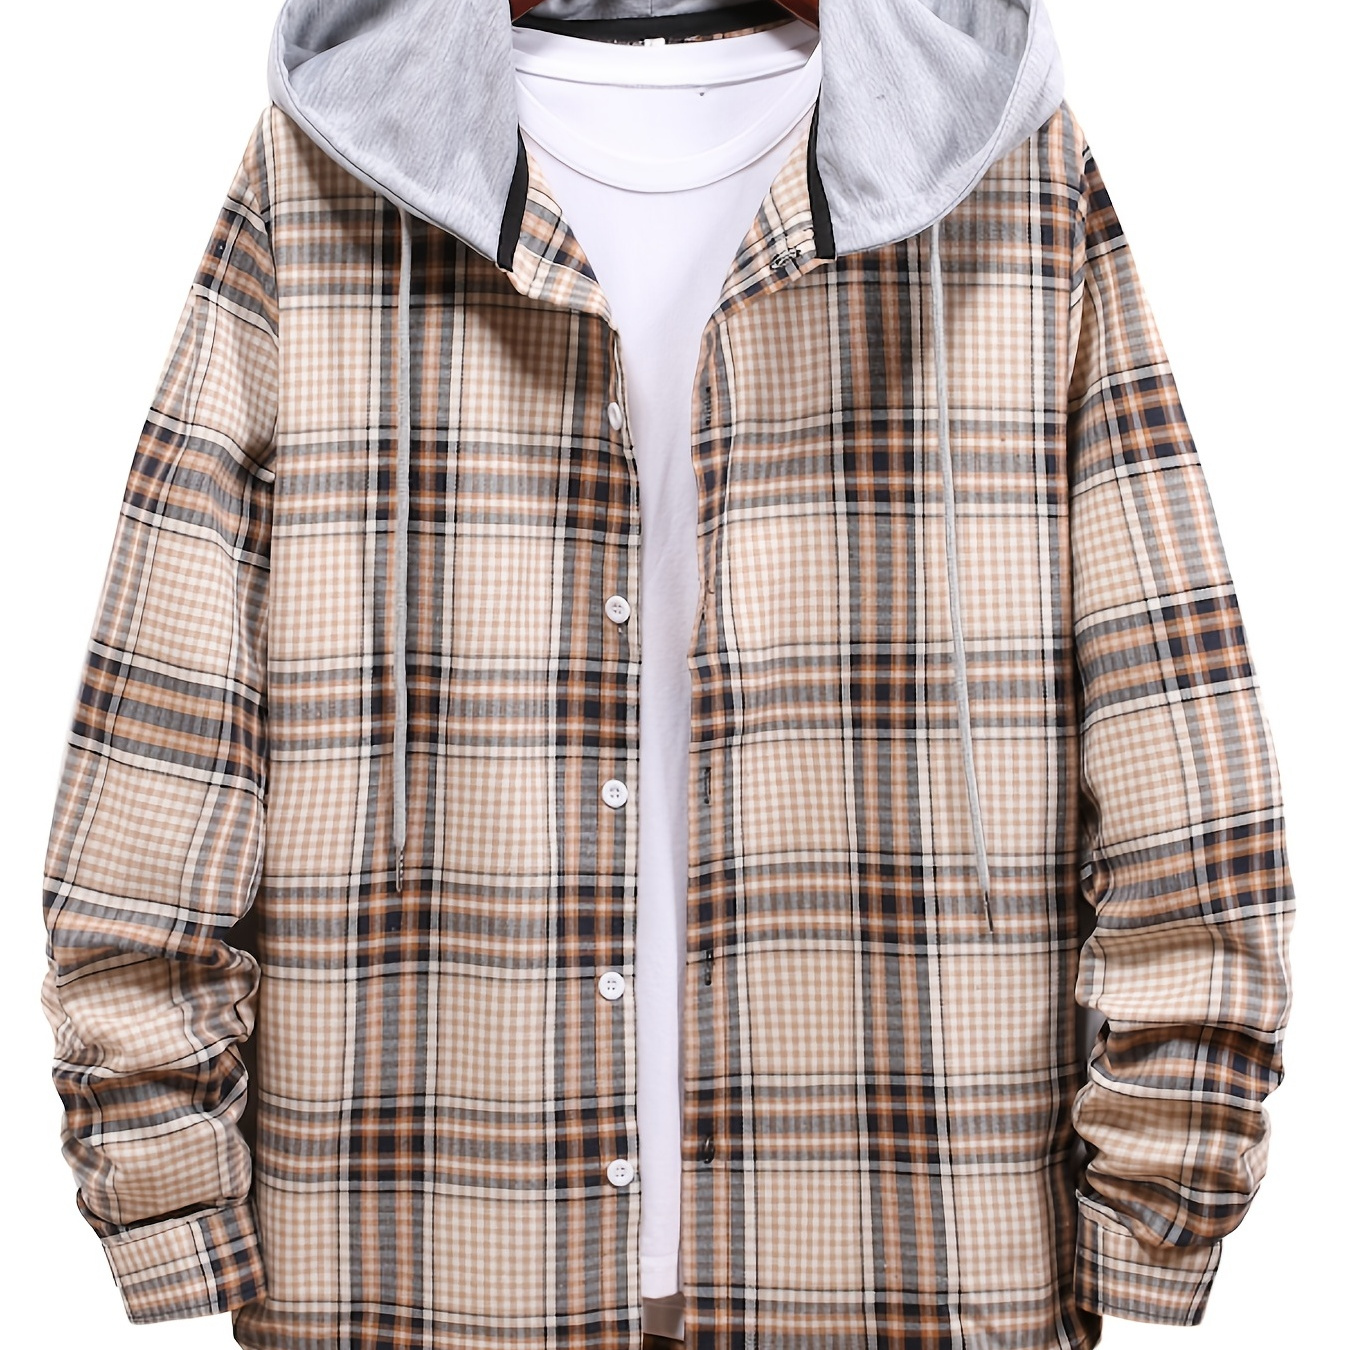 Men's Long Sleeve Hoodie Jacket Plaid Button Down Flannel Shirts ...